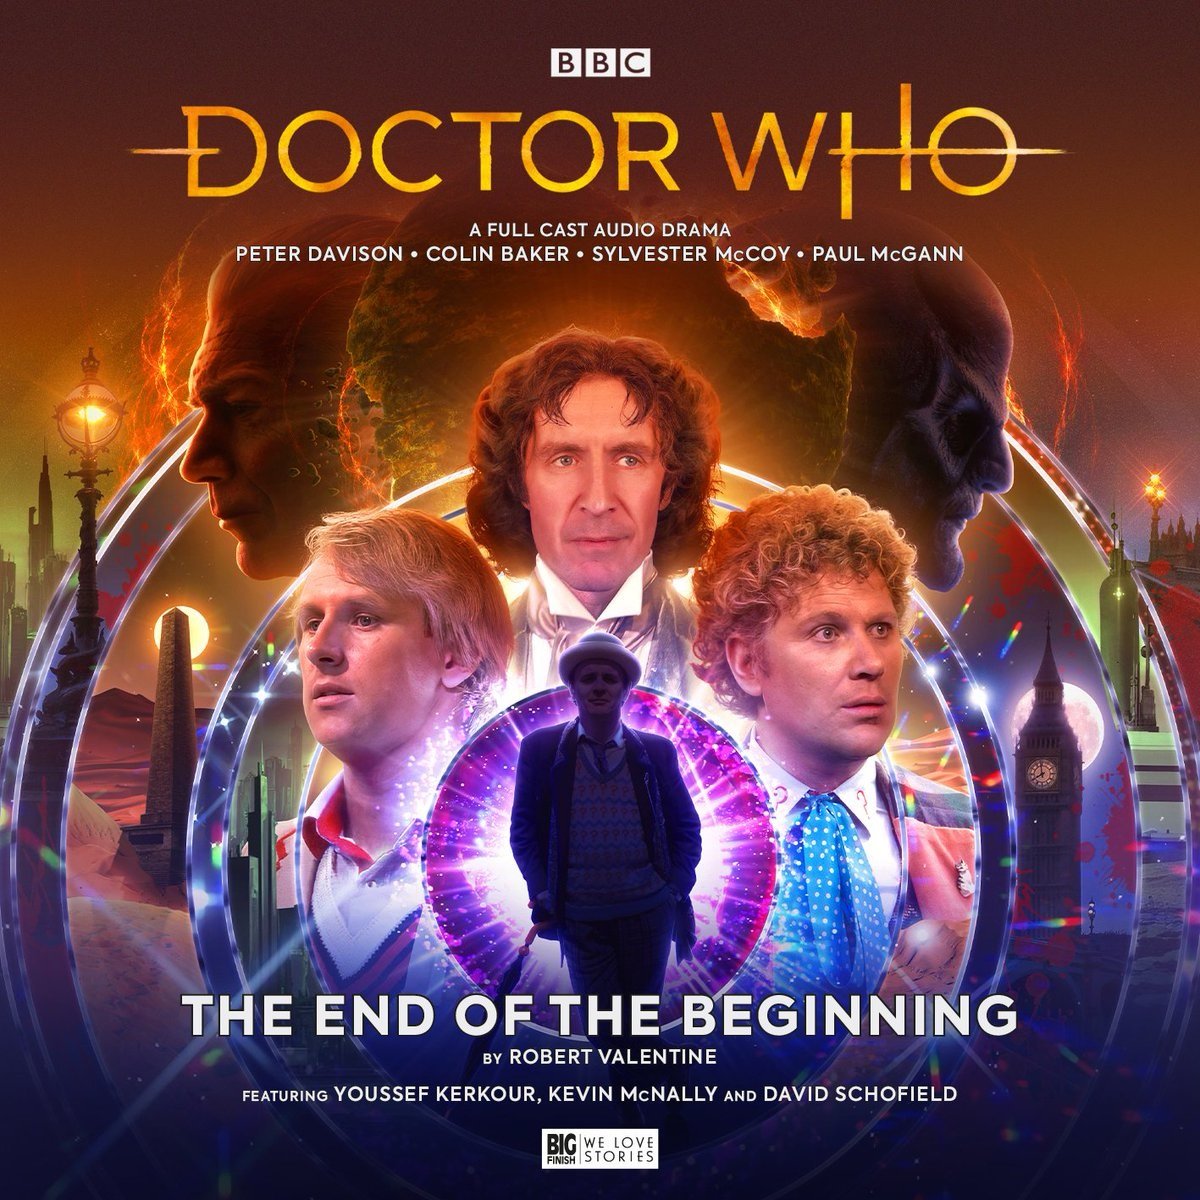 Reviewed: Big Finish’s Final Doctor Who Main Range Release, The End of the Beginning